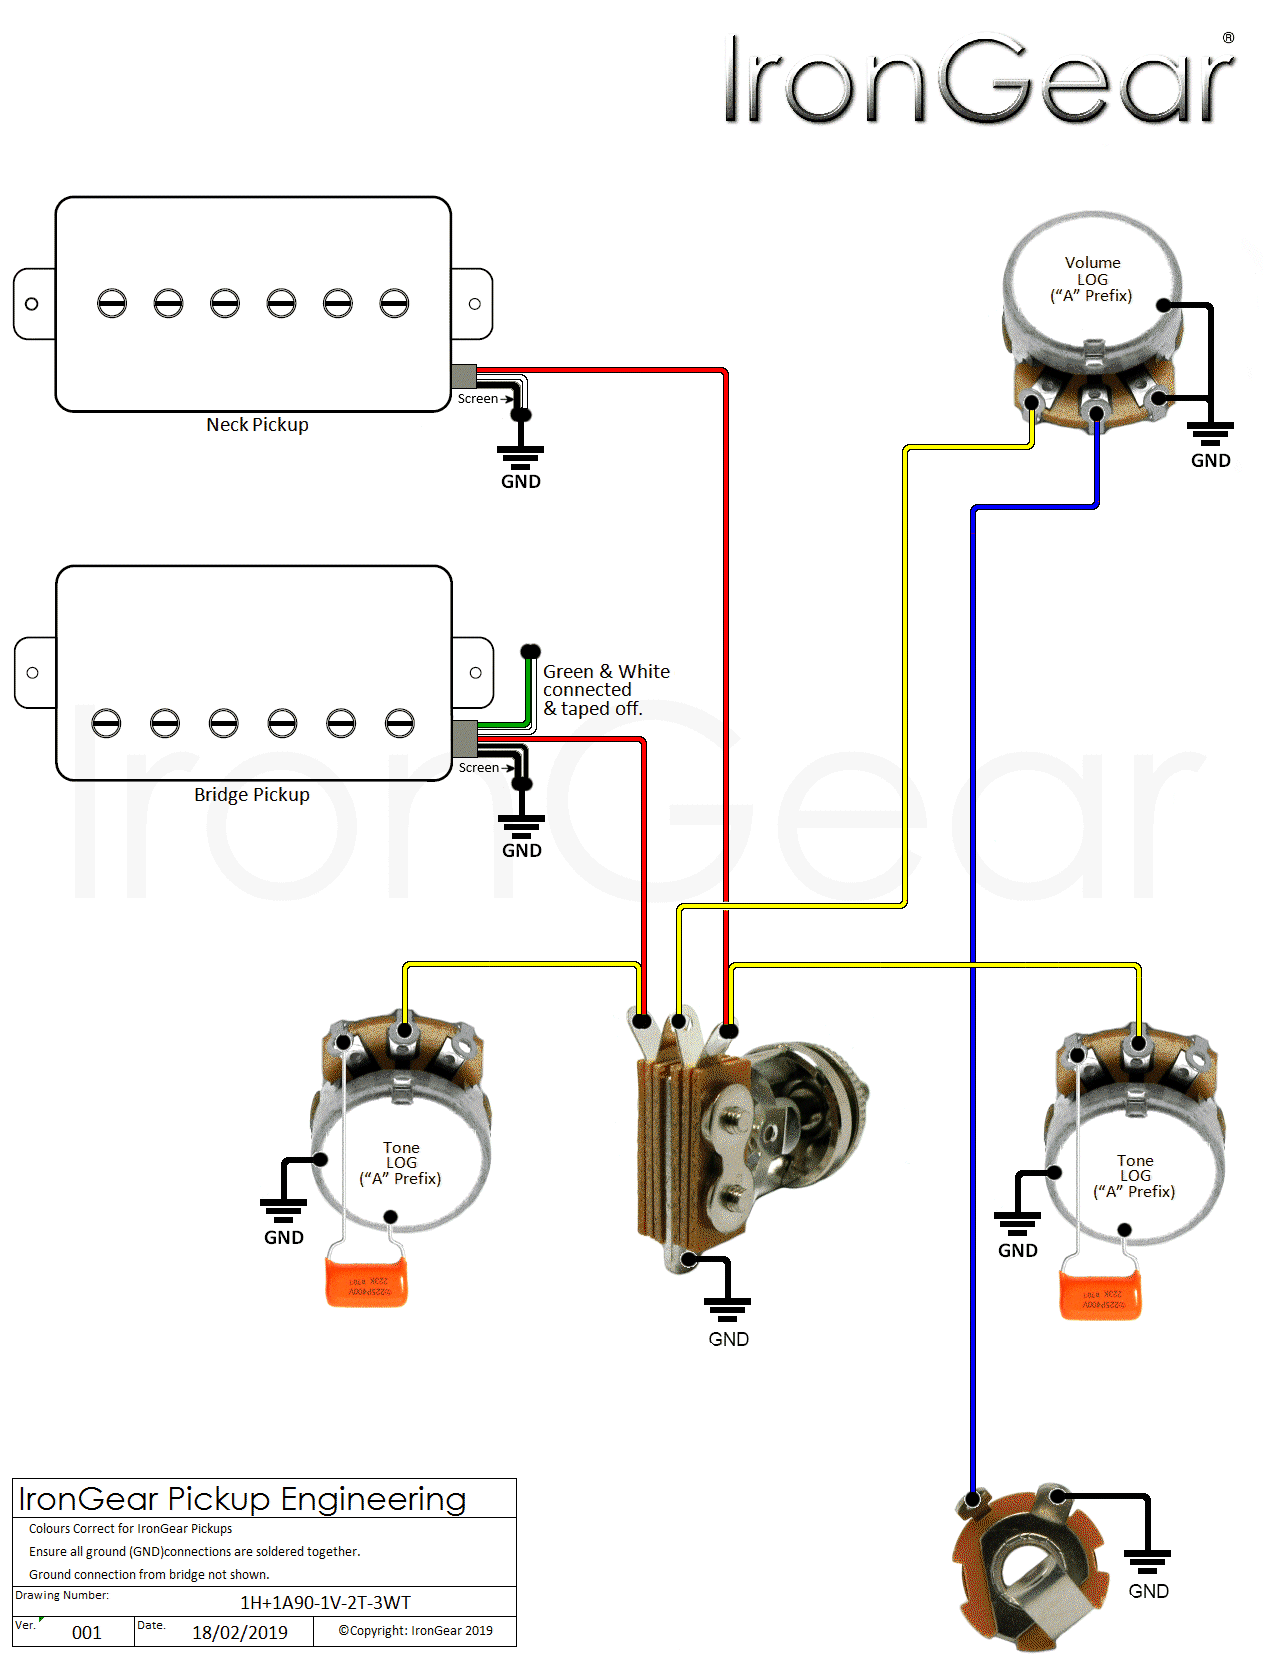 Telecaster Hh Wiring Diagram from www.irongear.co.uk